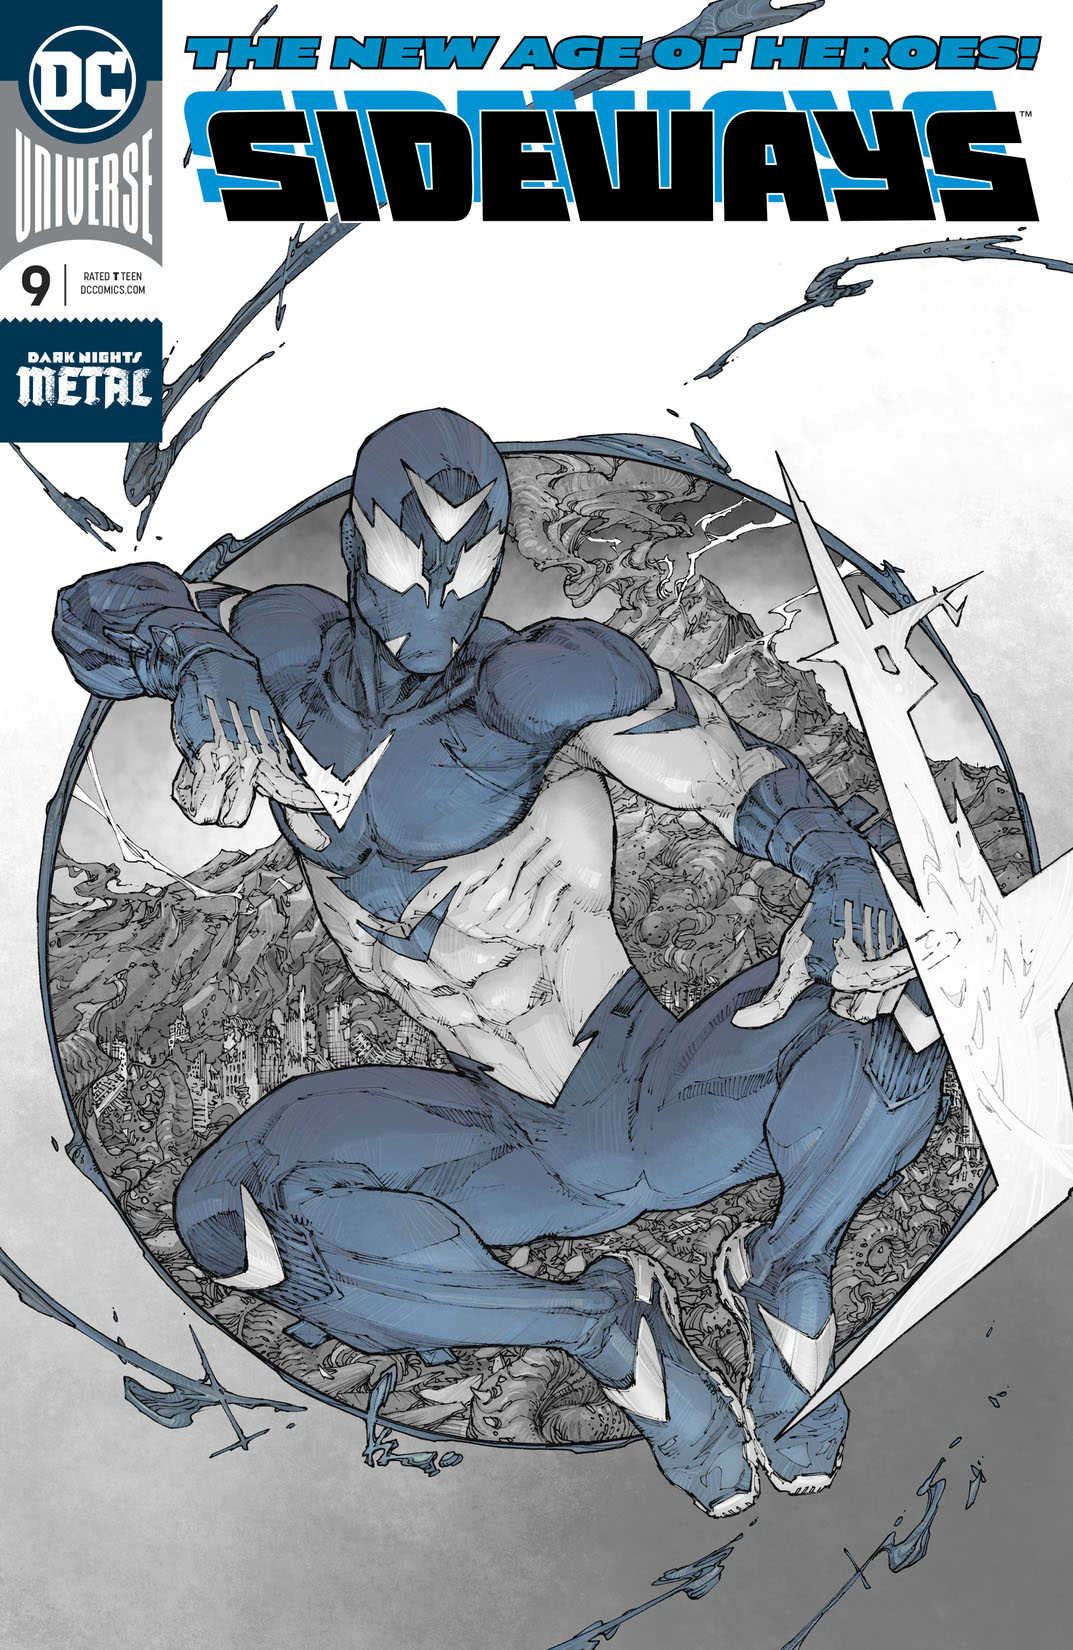 Sideways #9 preview images